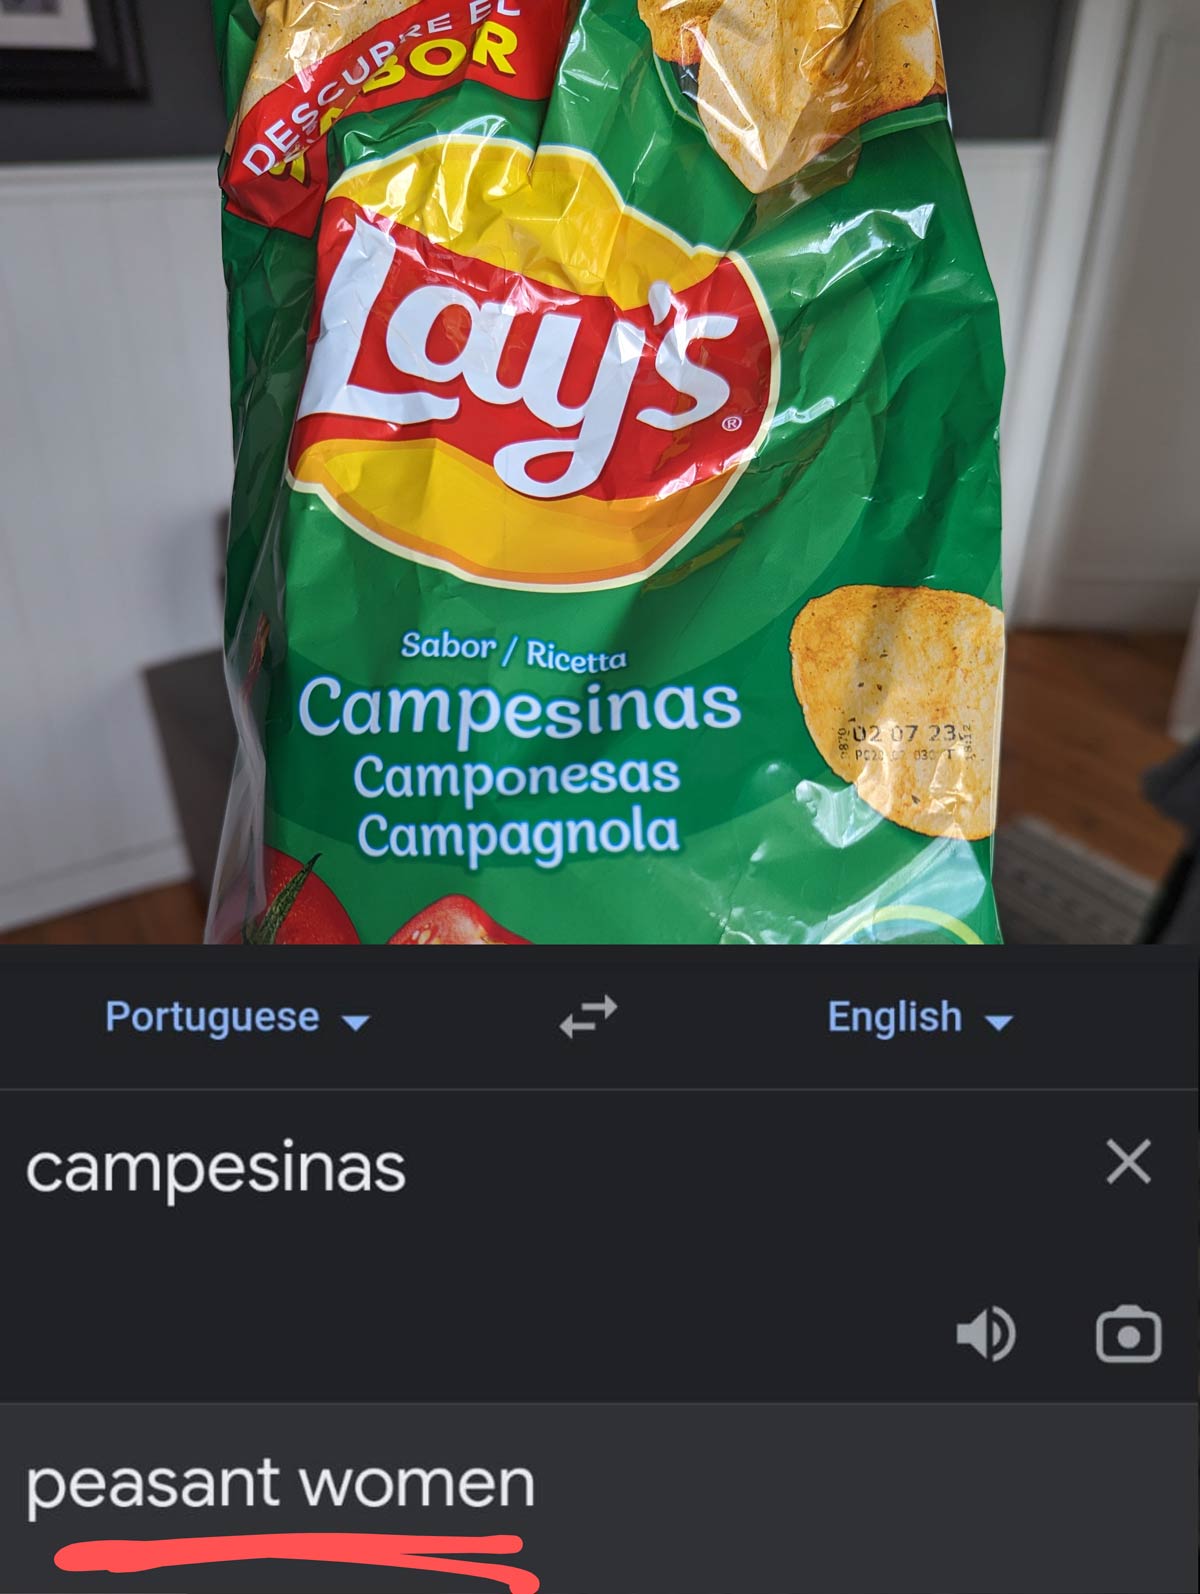 Wanted to know what flavor my Portuguese crisps are..